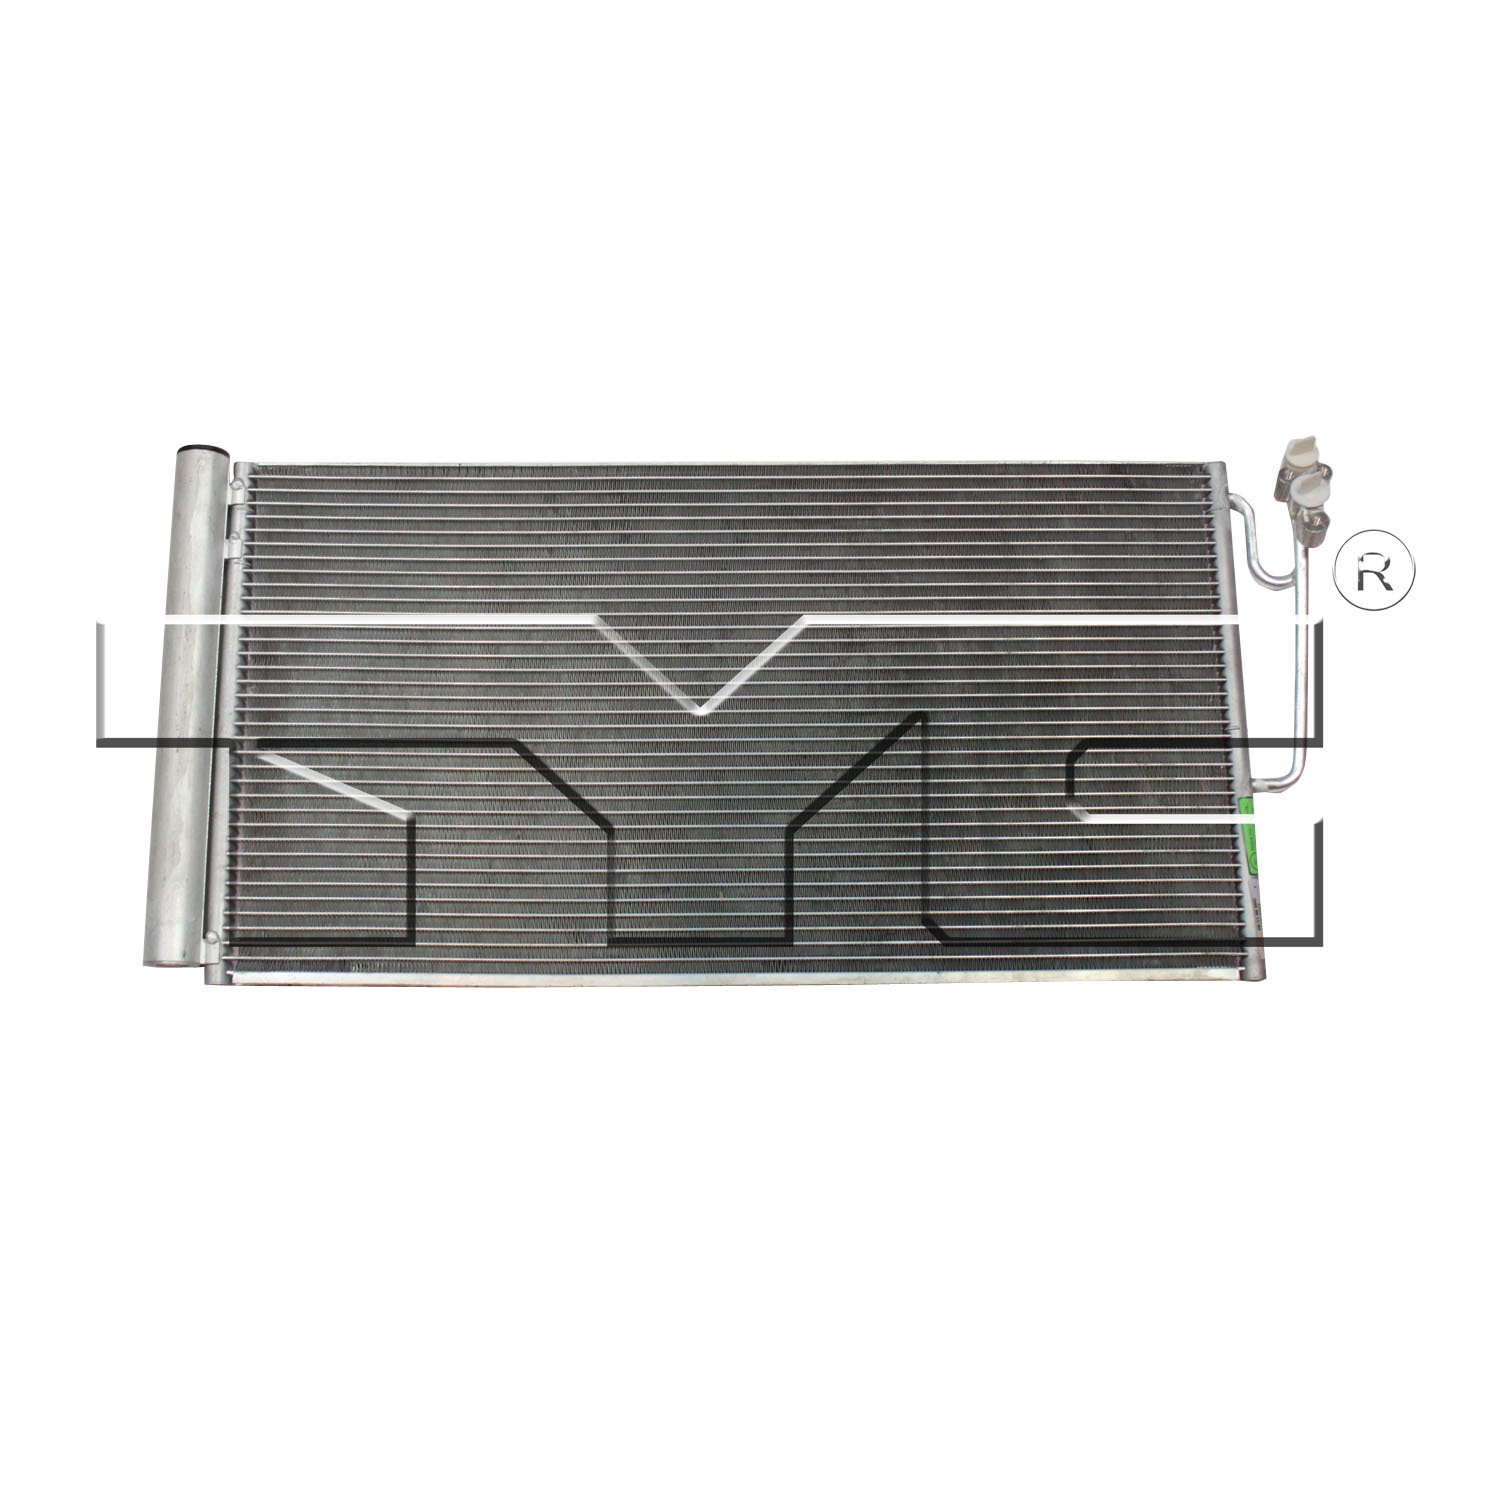 Aftermarket AC CONDENSERS for MINI - COOPER COUNTRYMAN, COOPER COUNTRYMAN,11-16,Air conditioning condenser